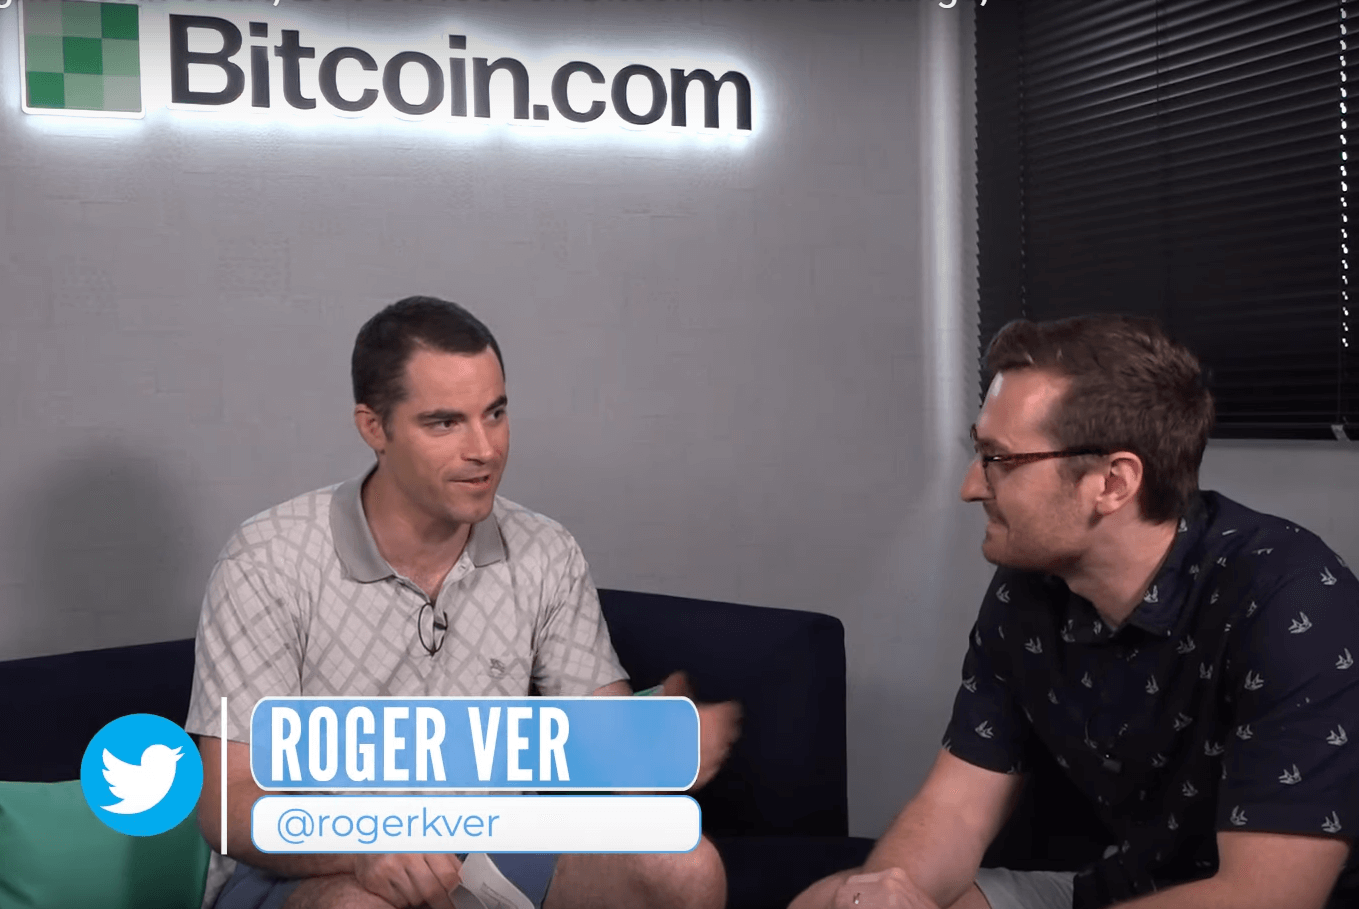 Roger Ver to launch crypto exchange on Bitcoin.com - Coin ...